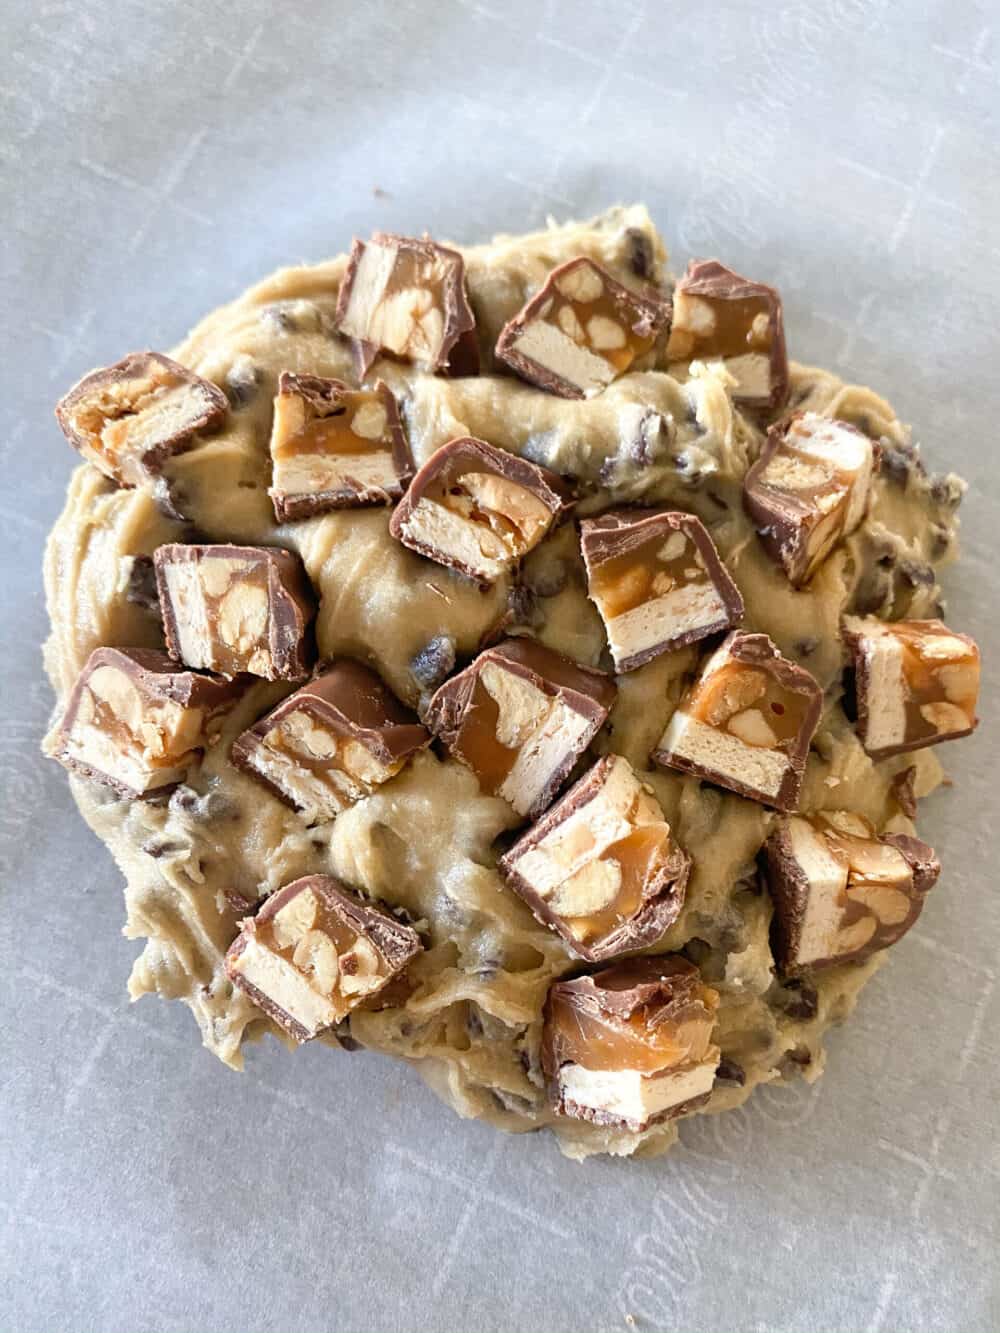 add cubed snickers bar pieces to top of hot cookie